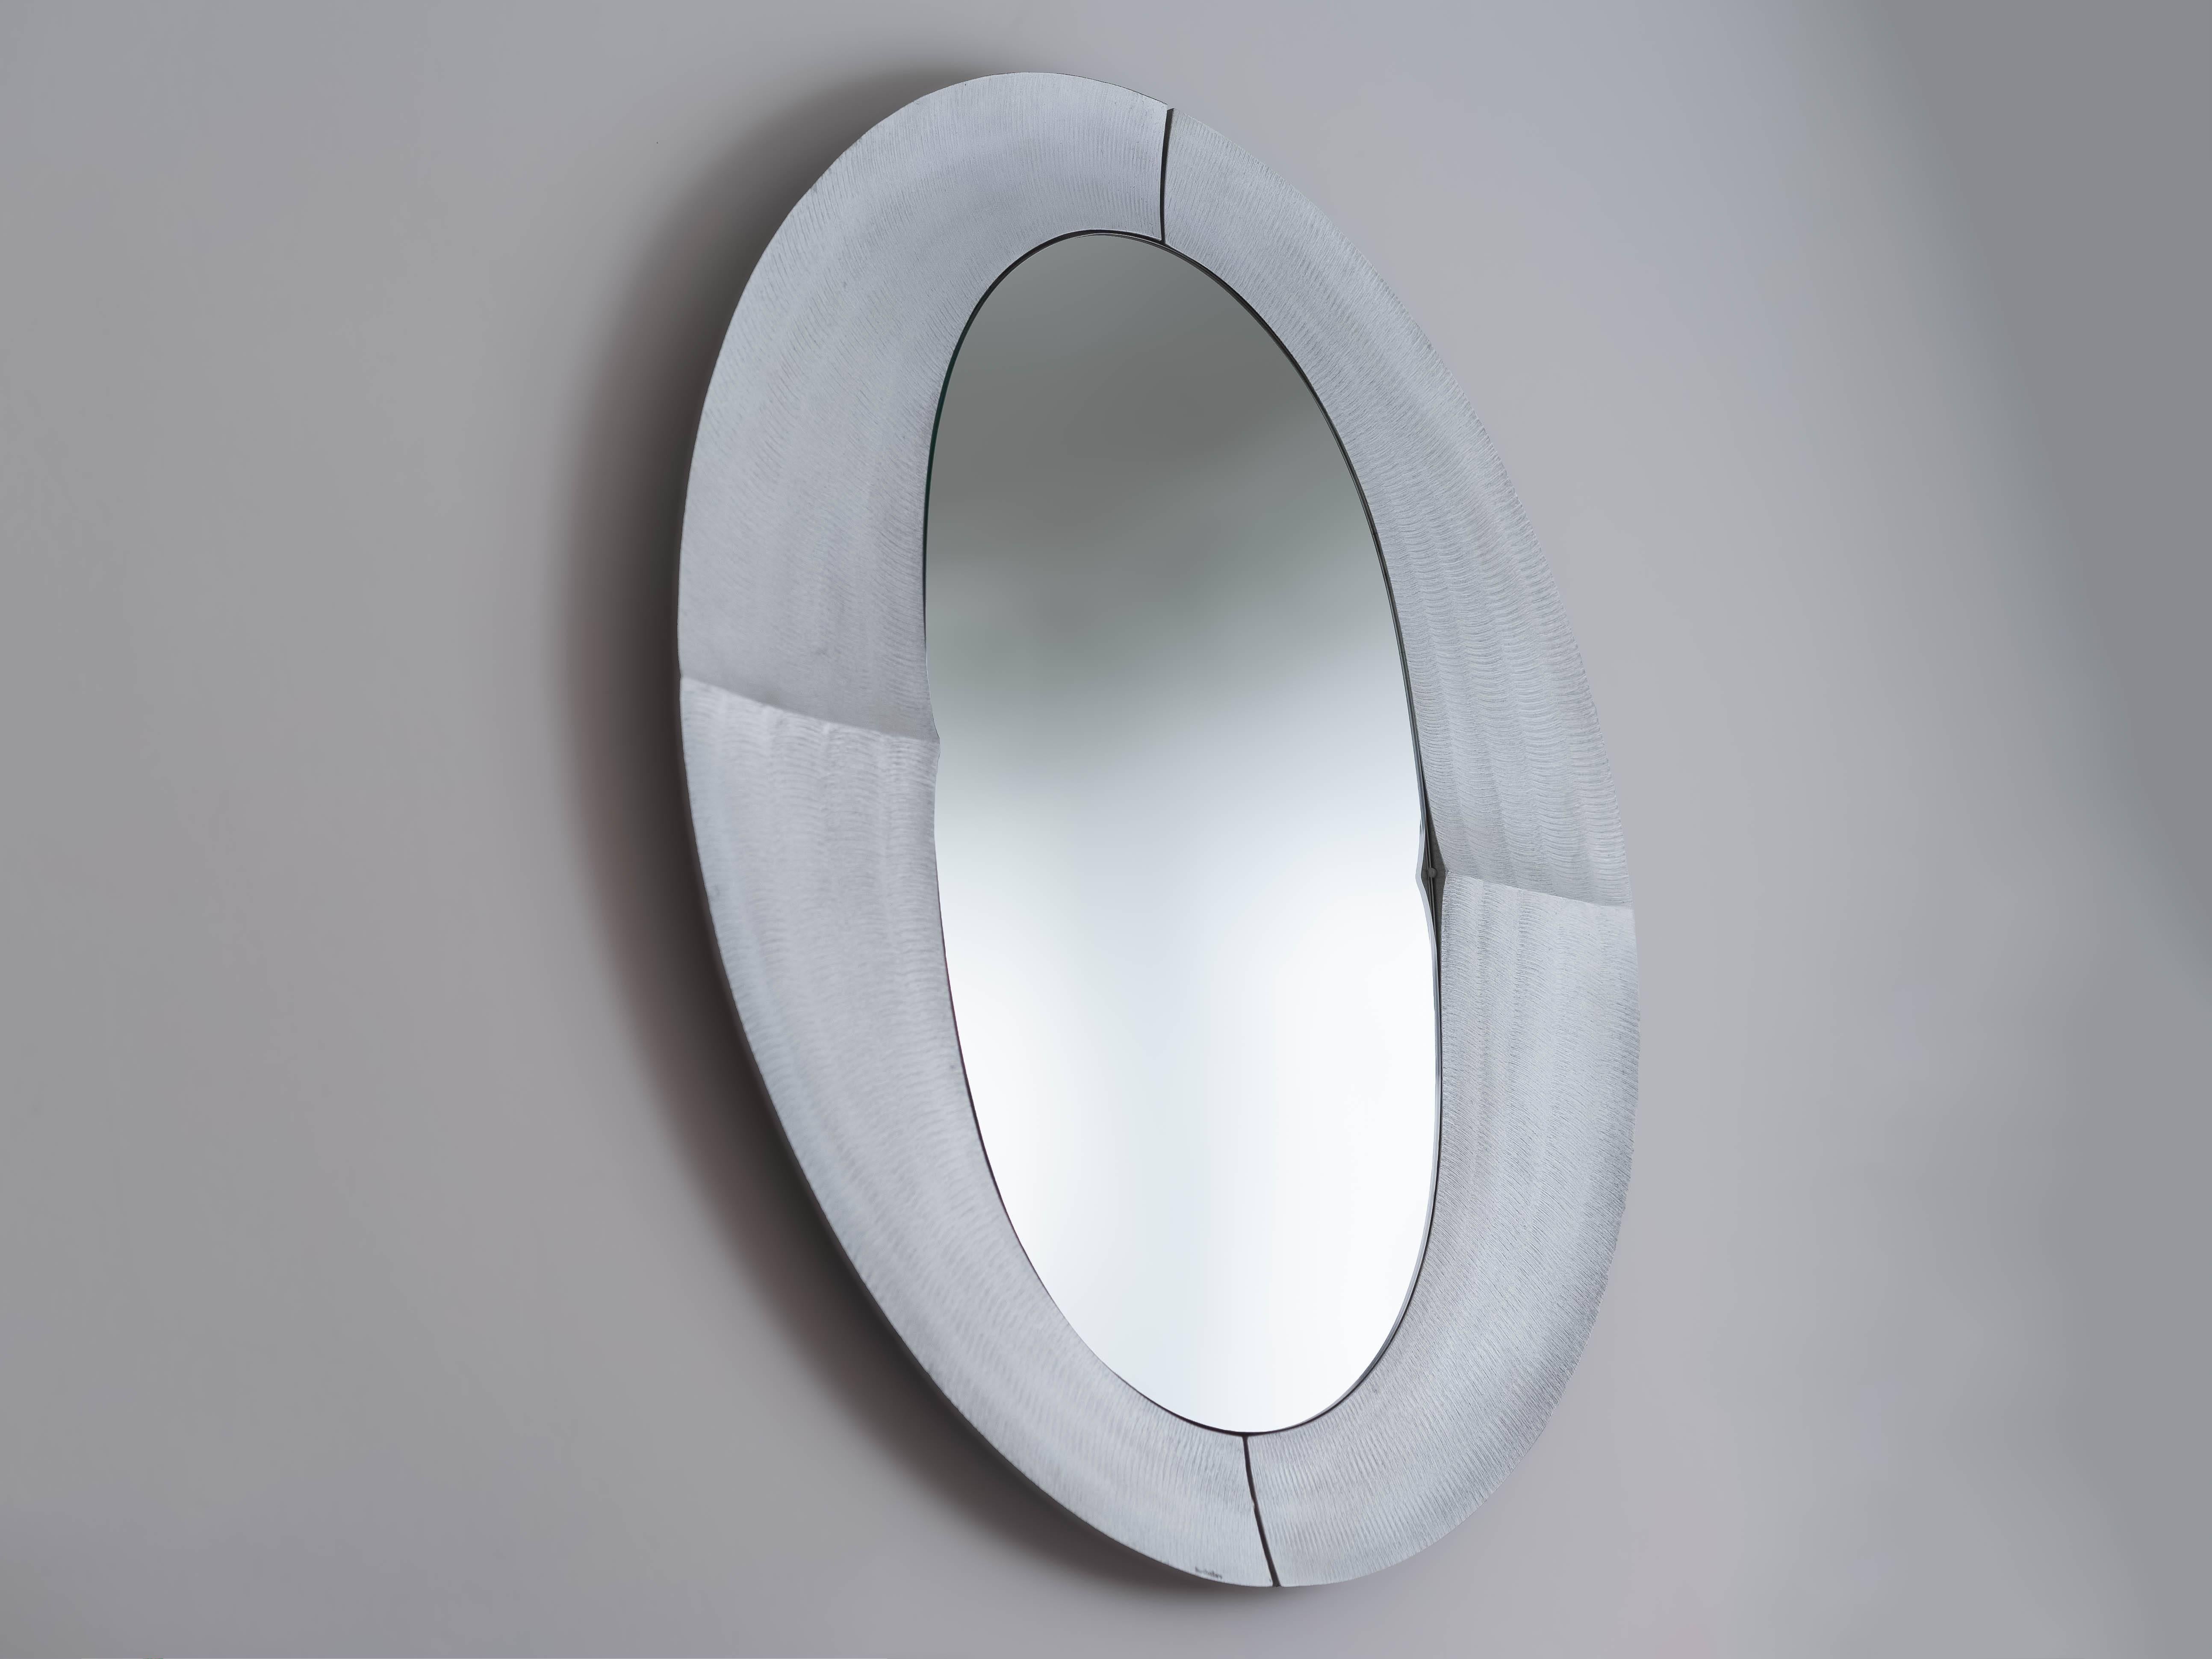 A stunning etched aluminium mirror by Lorenzo Burchiellaro produced by his Atelier Burchiellaro workshop in the 1970s. A master of metalwork and the use of unique surface treatments, Burchiellaro continuously researched new techniques to achieve